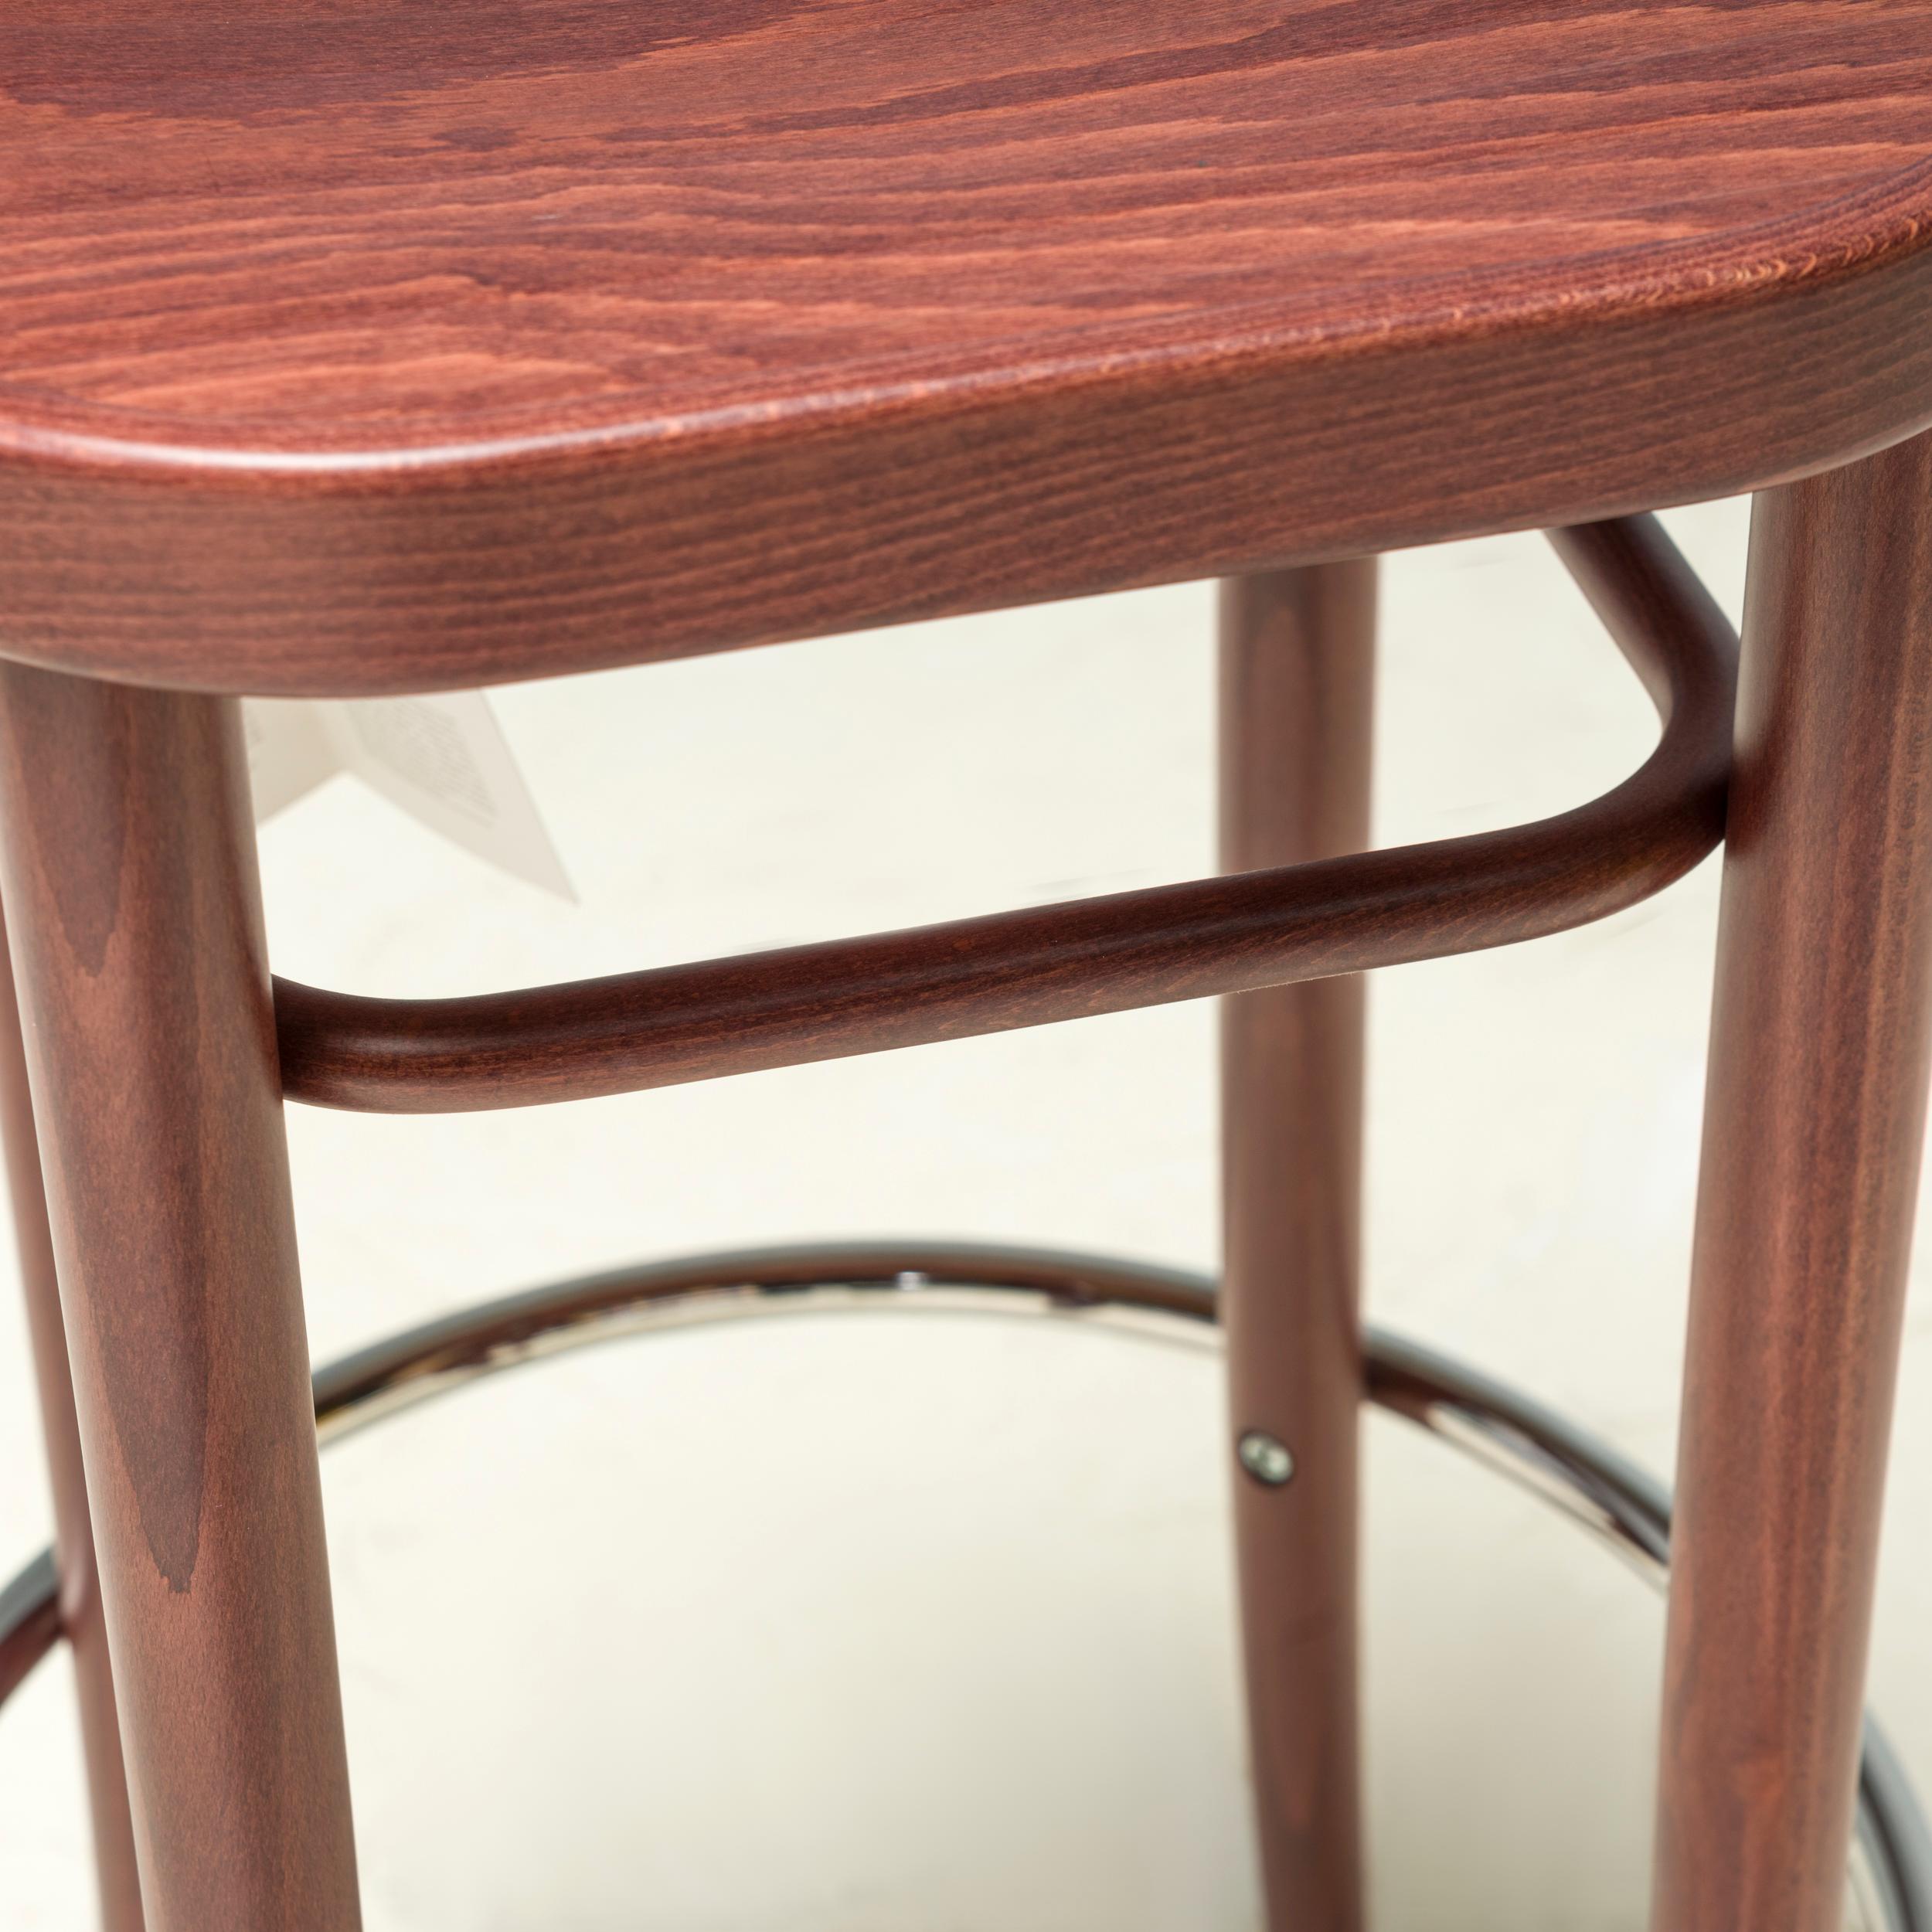 Thonet Vienna Walnut 144 Barhocker Stools, Set of 6 In Excellent Condition For Sale In London, GB